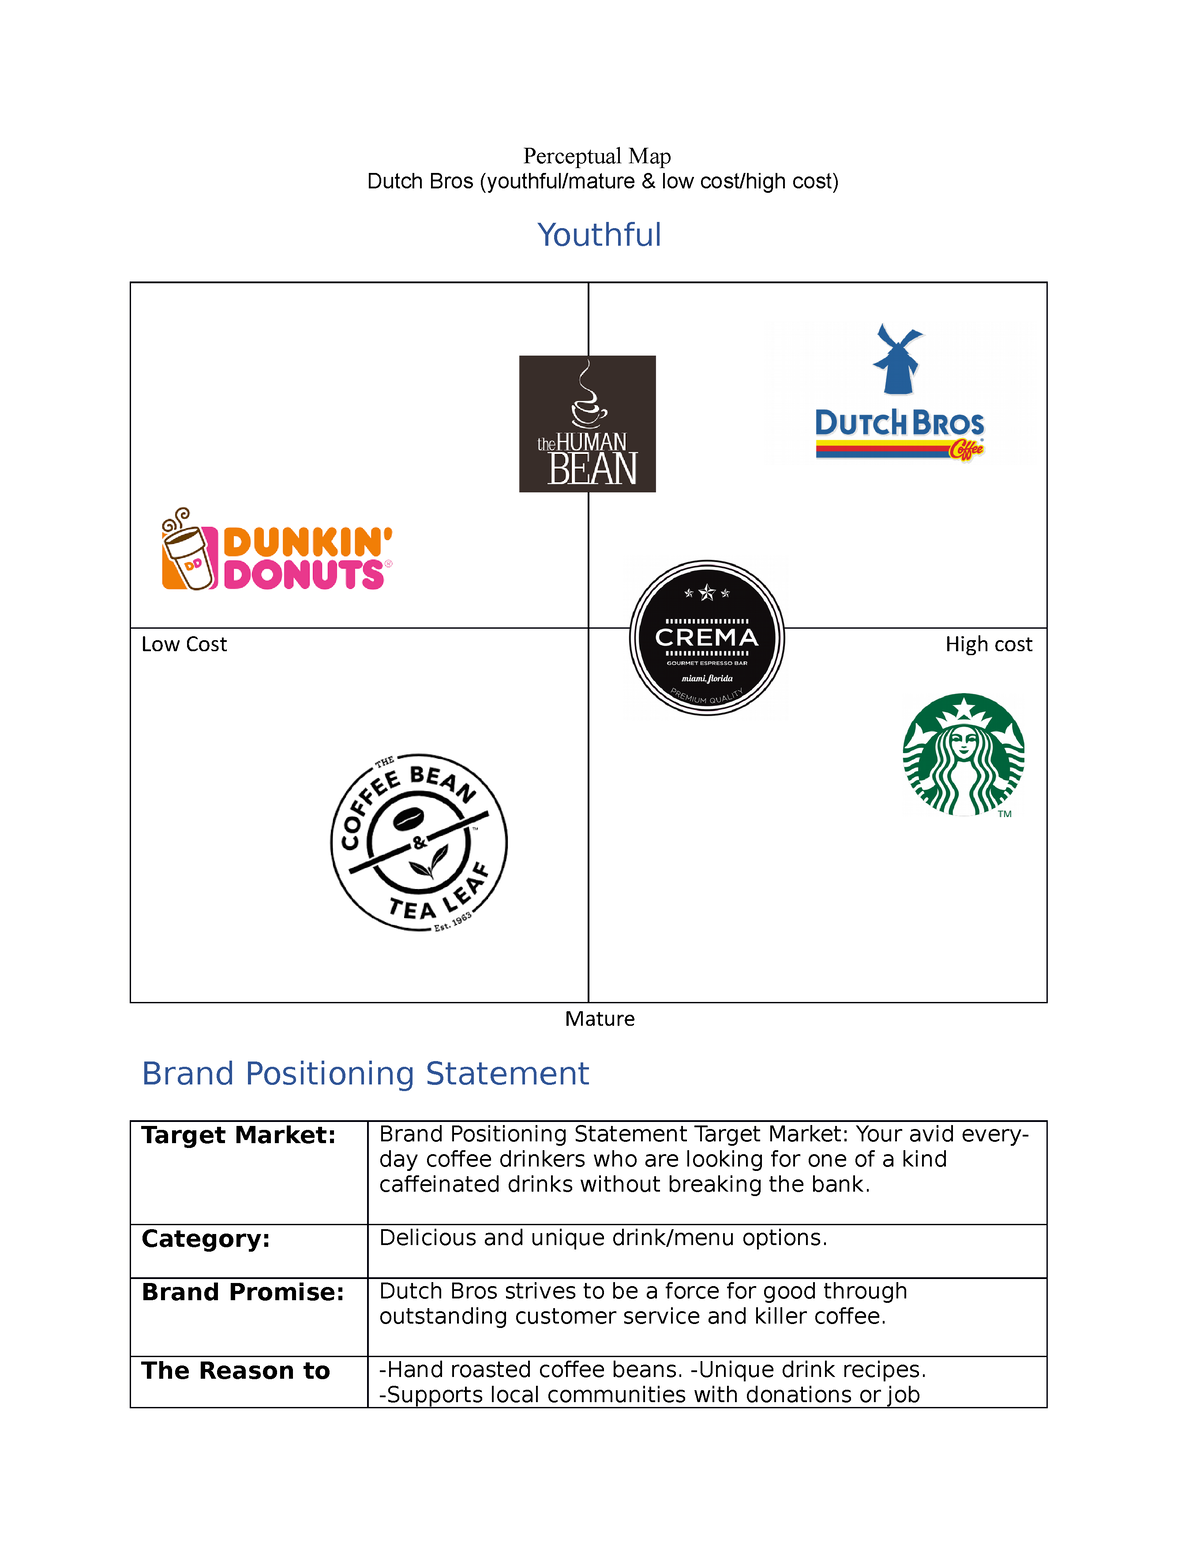 dunkin donuts positioning statement